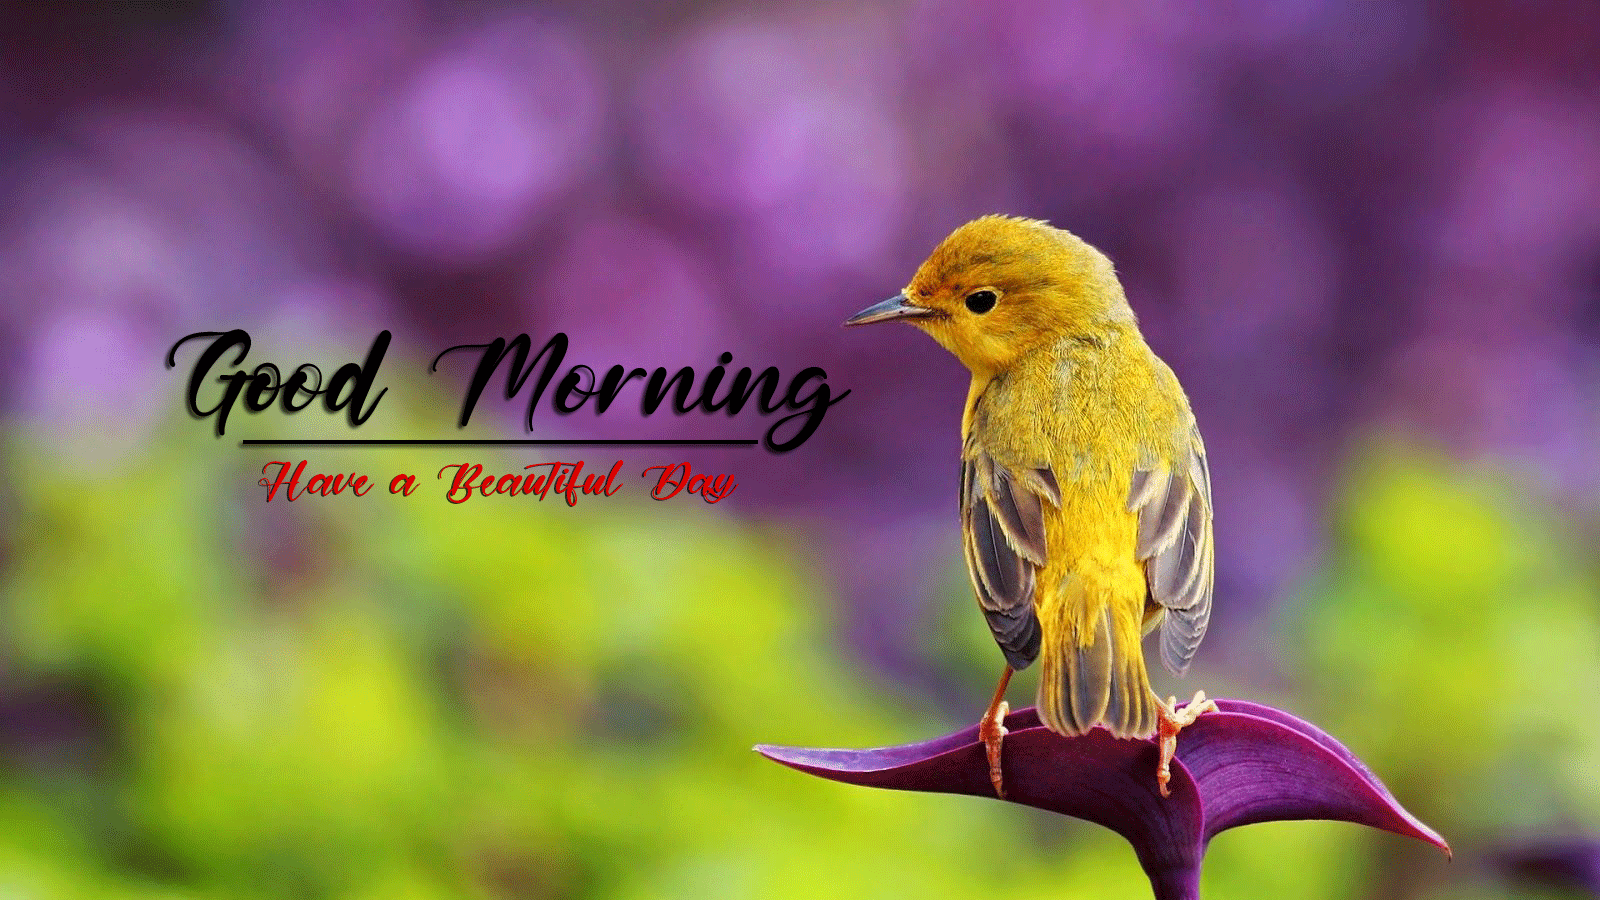 best good morning images photo free hd